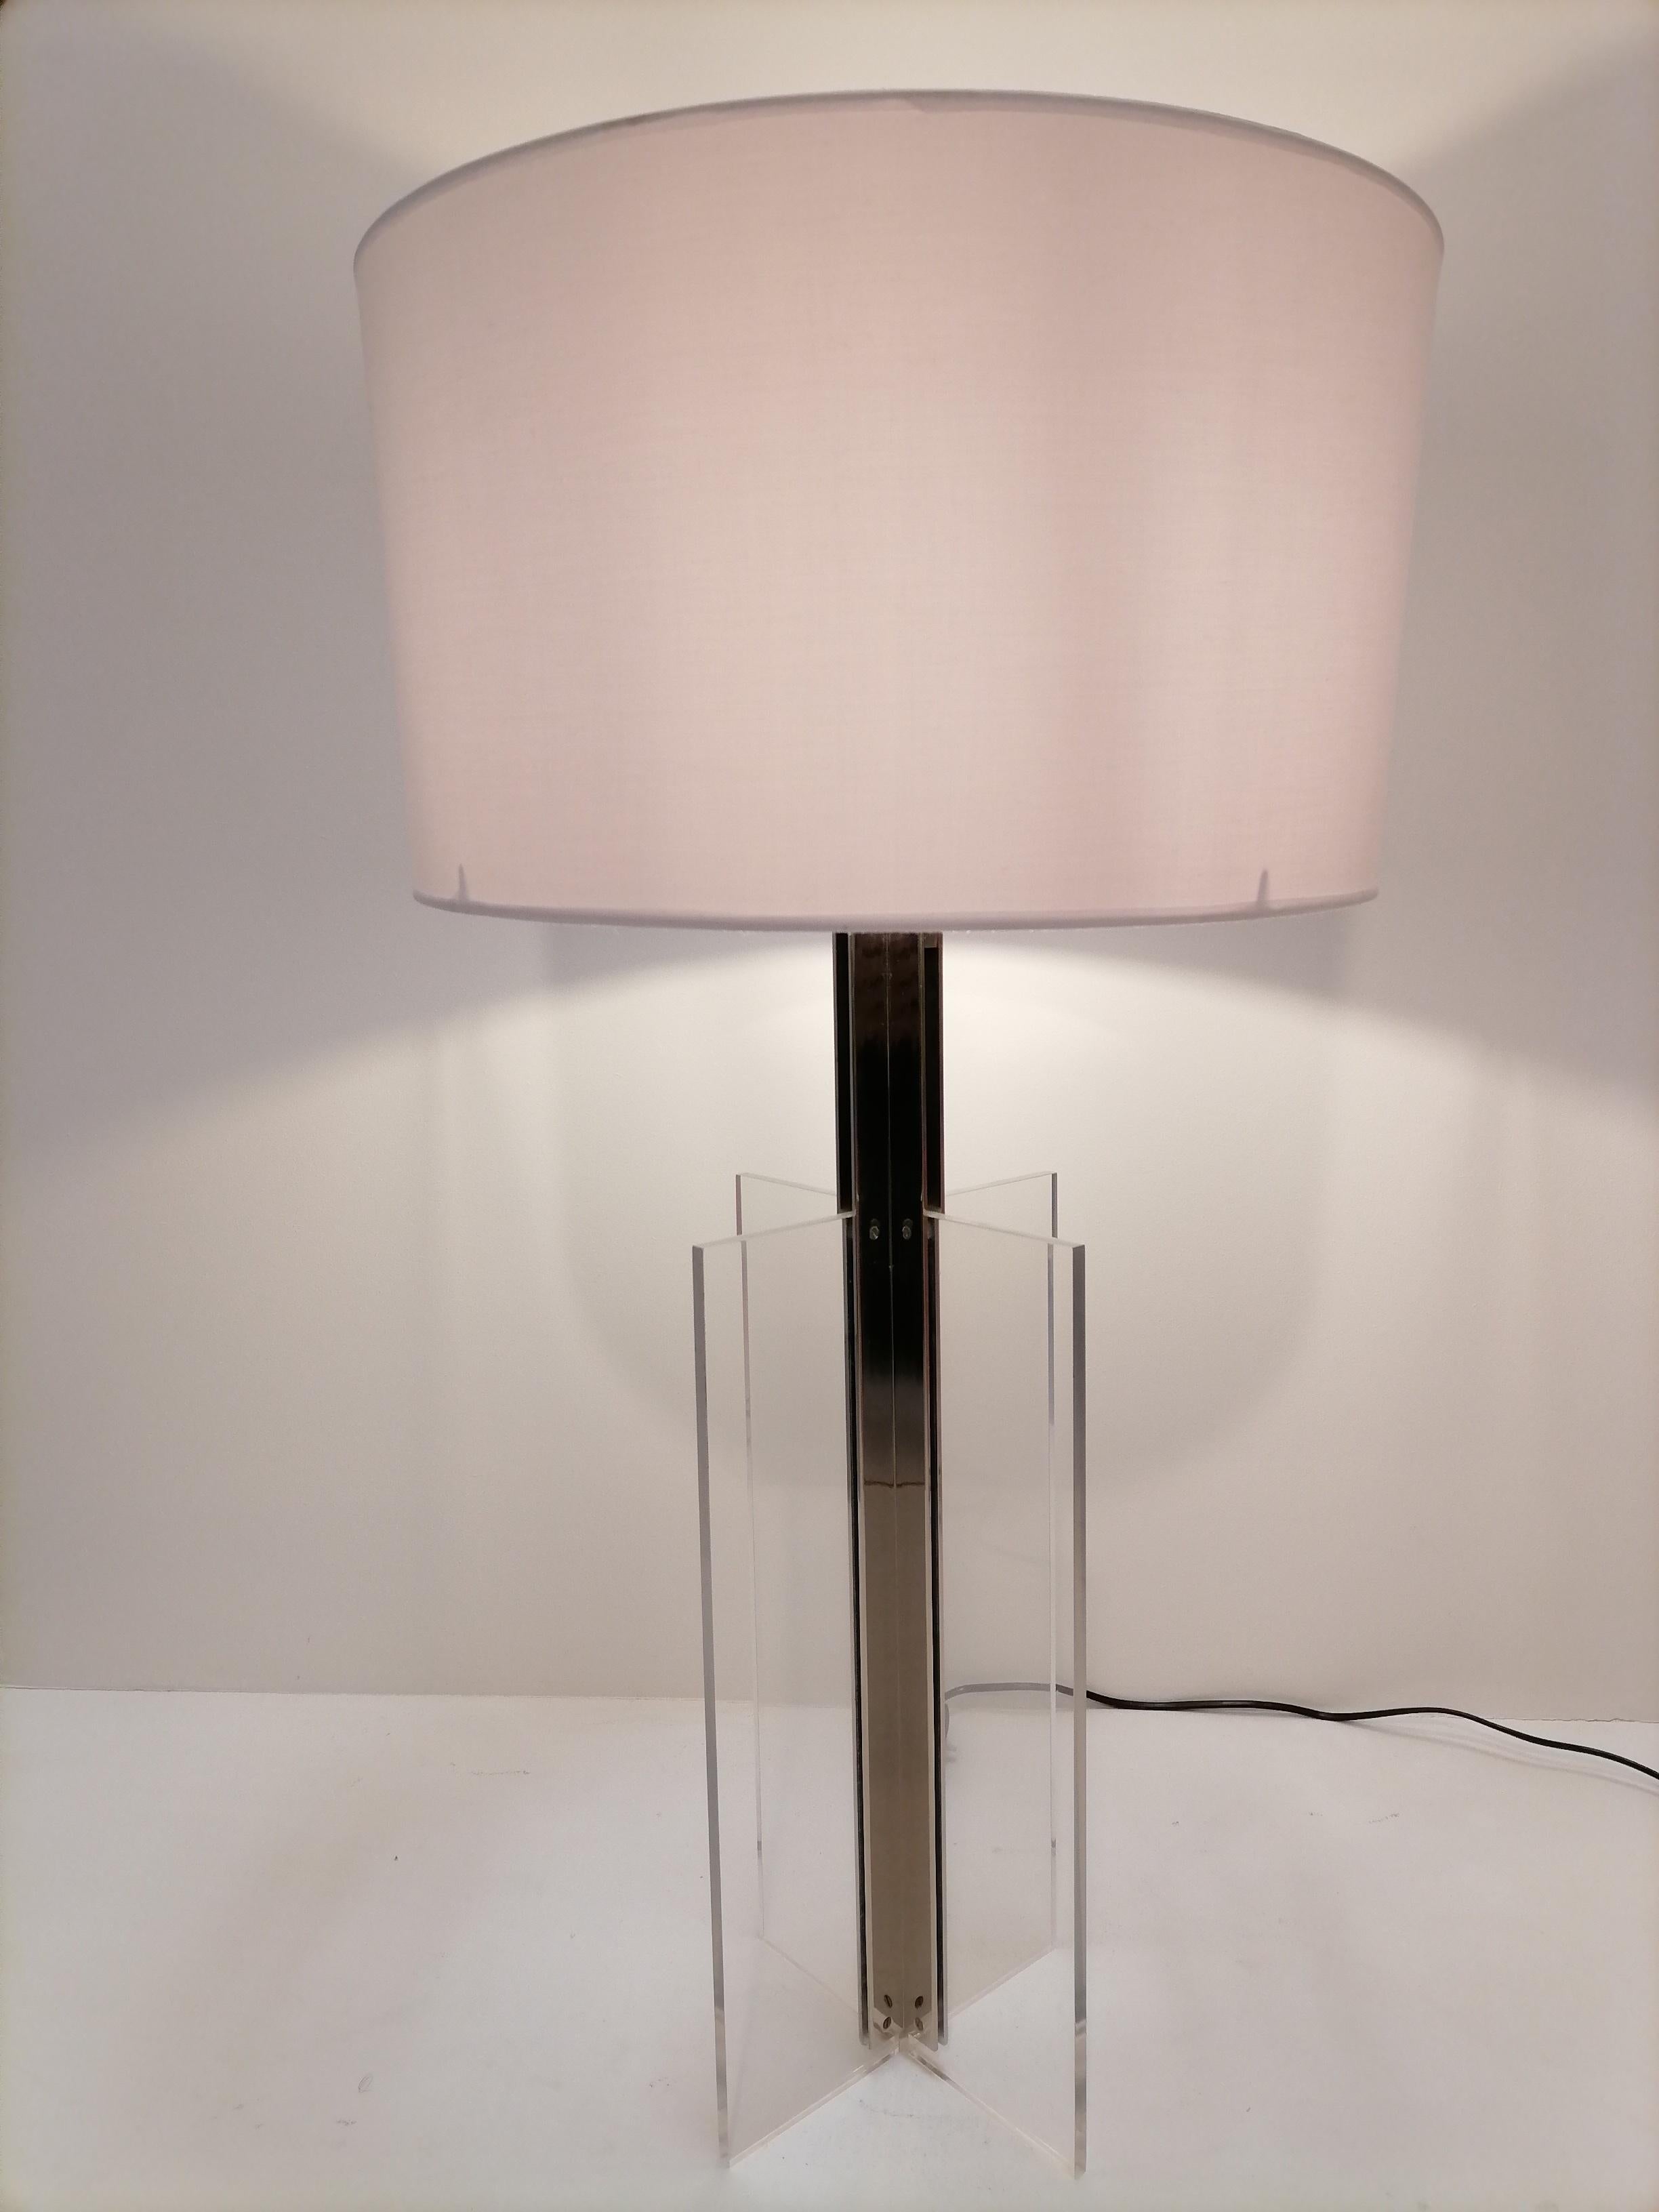 XXL Plexiglass and Inox midcentury French table lamp, 1970s

A huge lamp from the seventies 

X-shamped plexiglass lamp base 

Socket height 65cm
Height with shade 85cm
Lampe base W16cm

Shade not included.